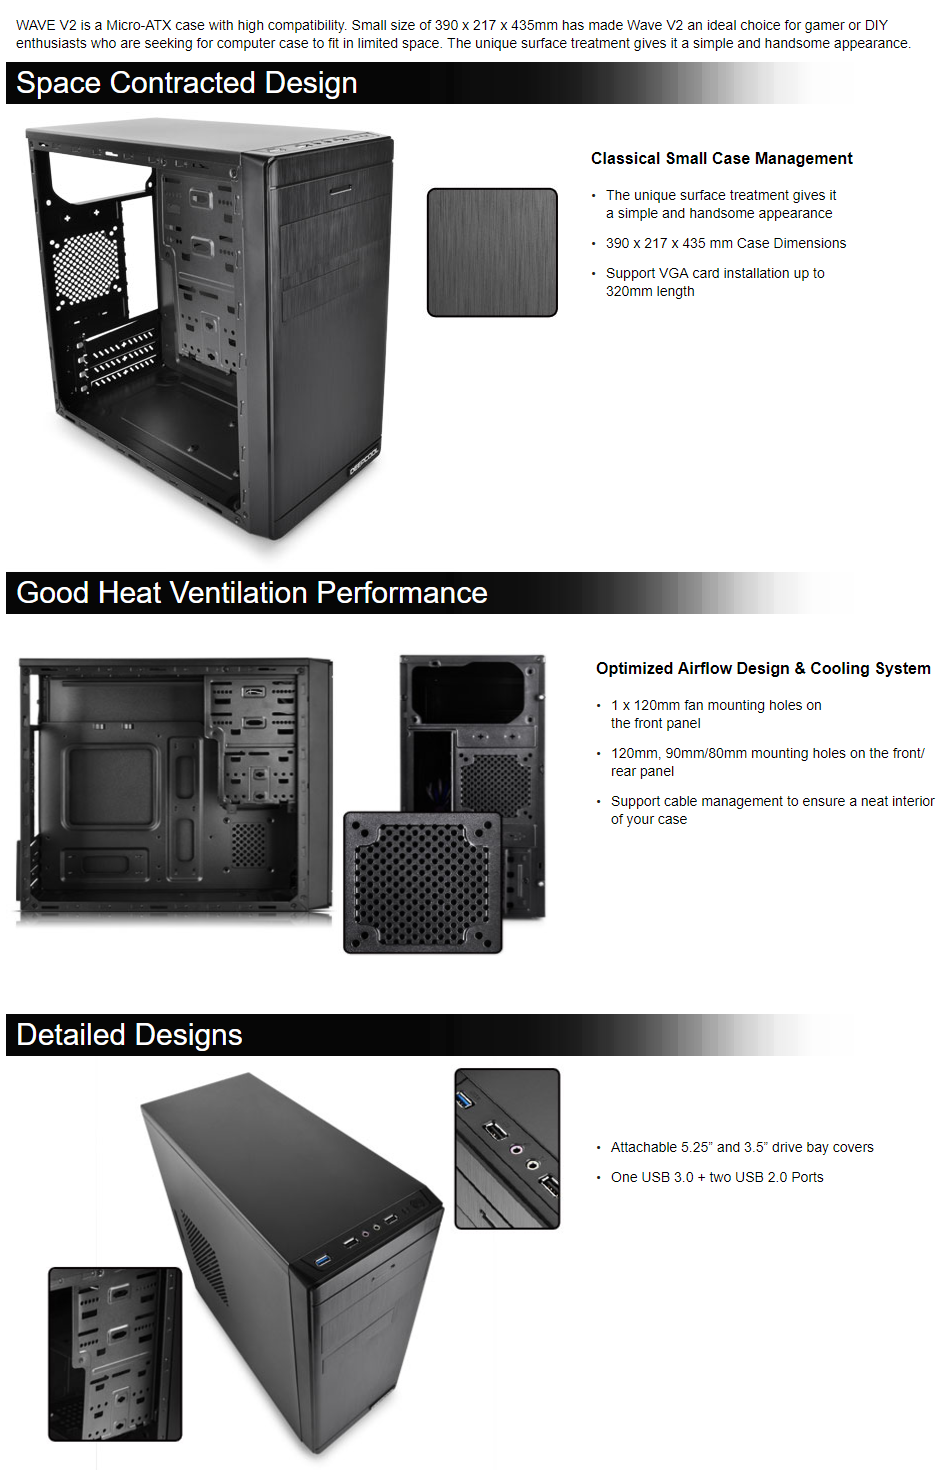 A large marketing image providing additional information about the product Deepcool Wave V2 mATX Tower Case - Additional alt info not provided